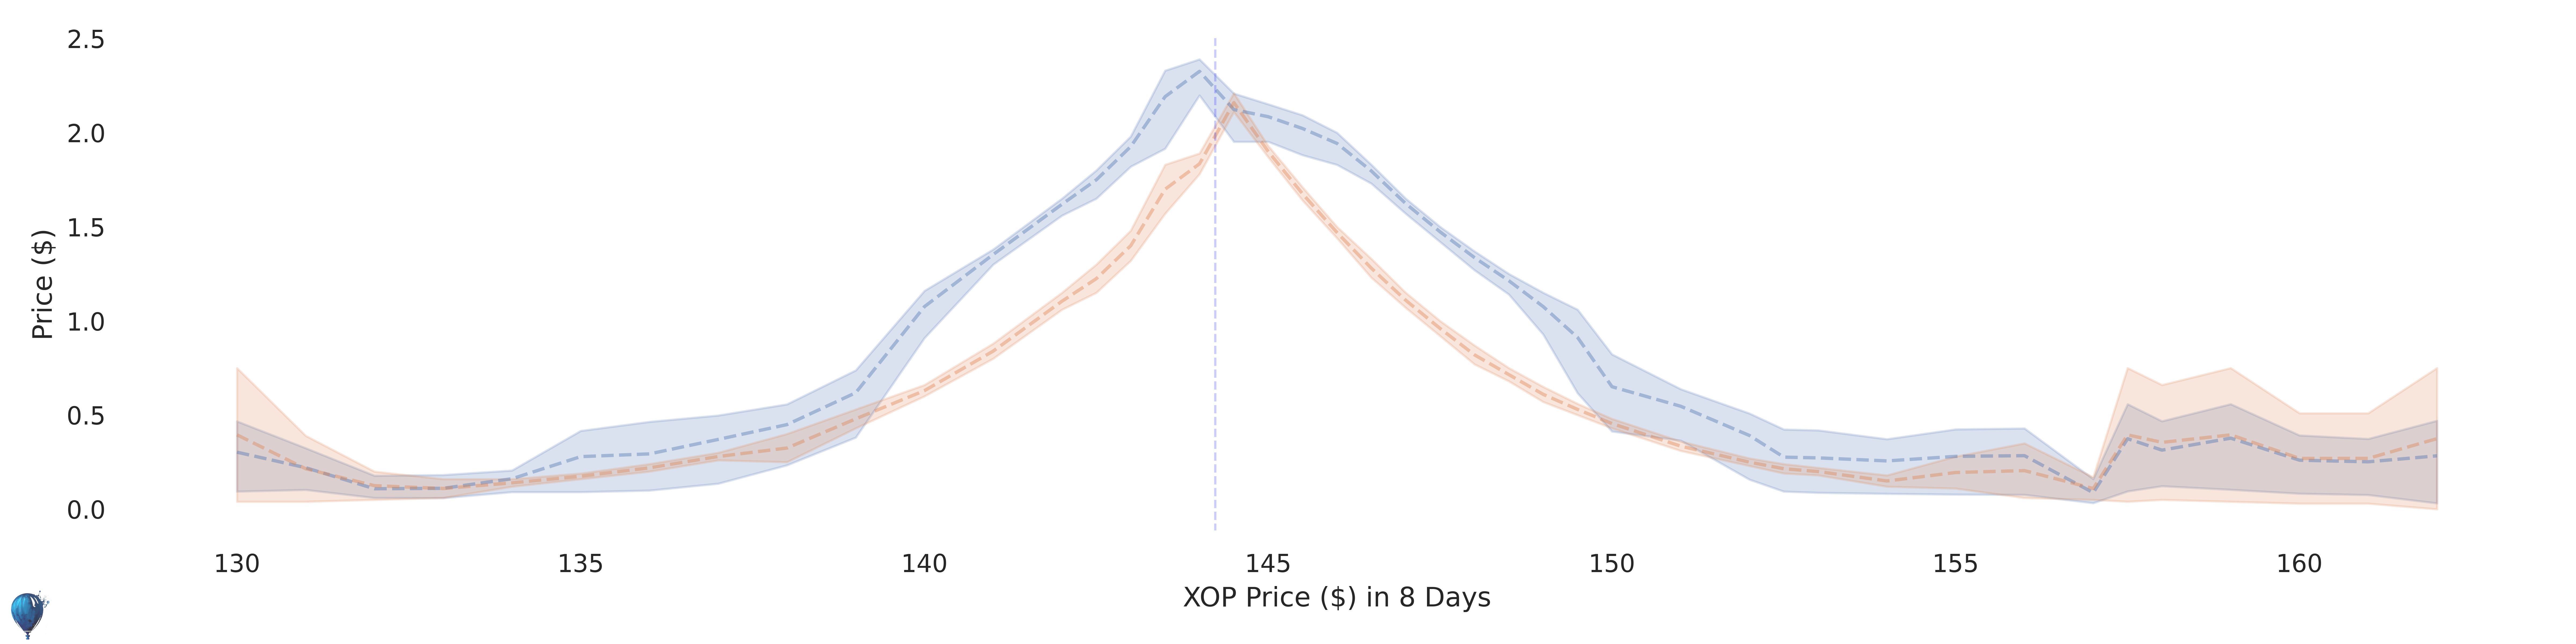 XOP current options pricing